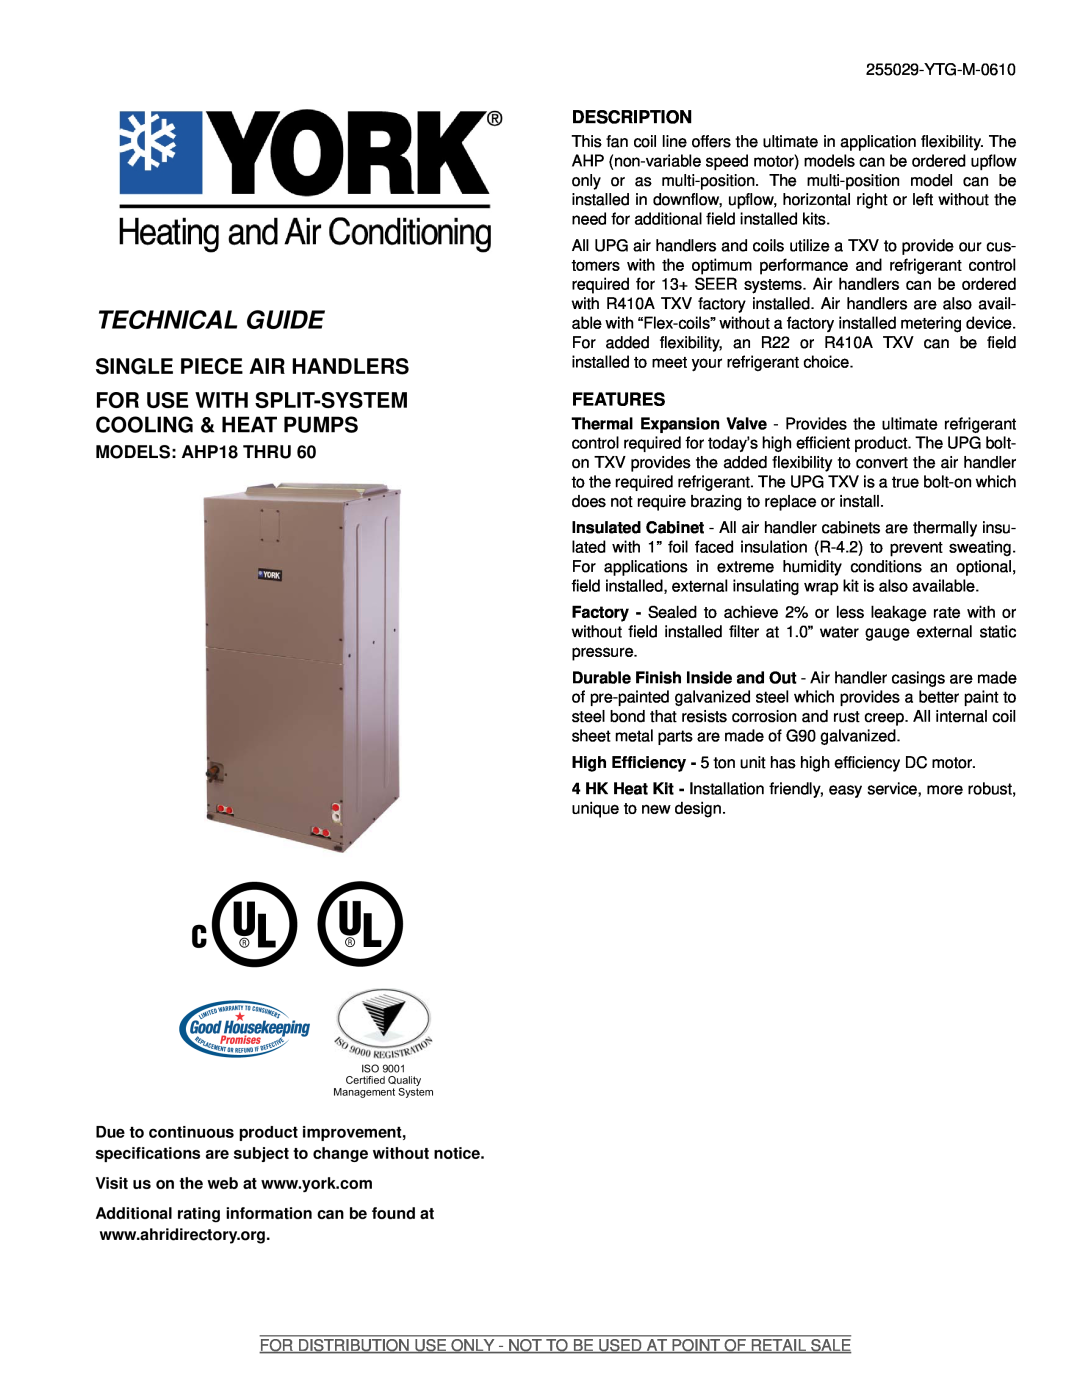 York specifications MODELS AHP18 THRU, Description, Features, Technical Guide, Single Piece Air Handlers 